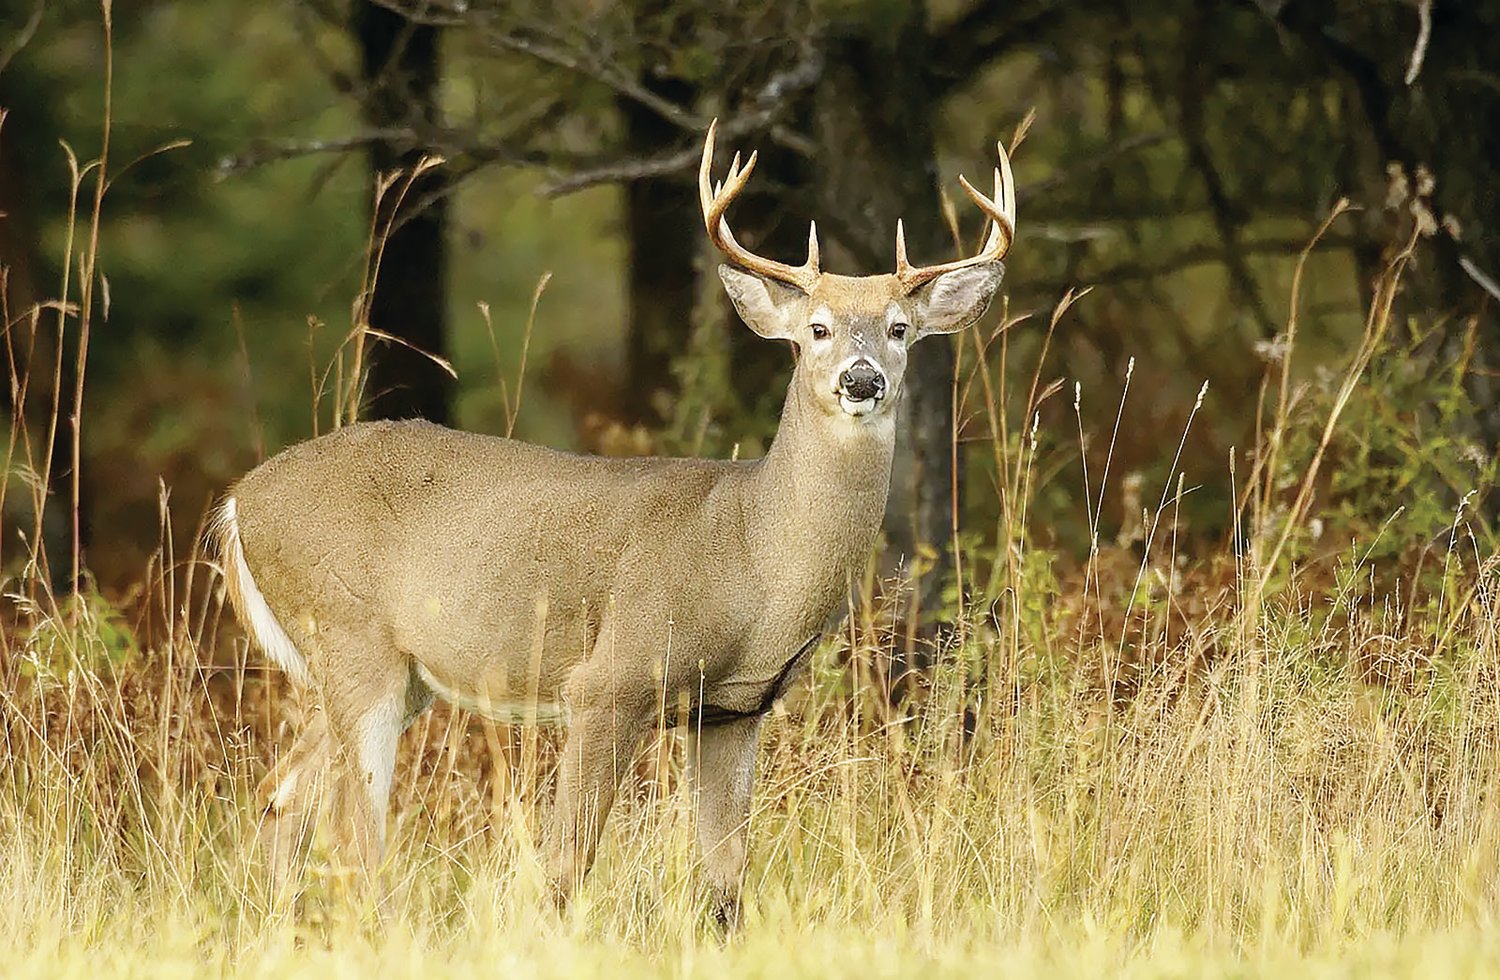 Missouri Department of Conservation (MDC) agents are asking hunters to not dump deer carcasses.